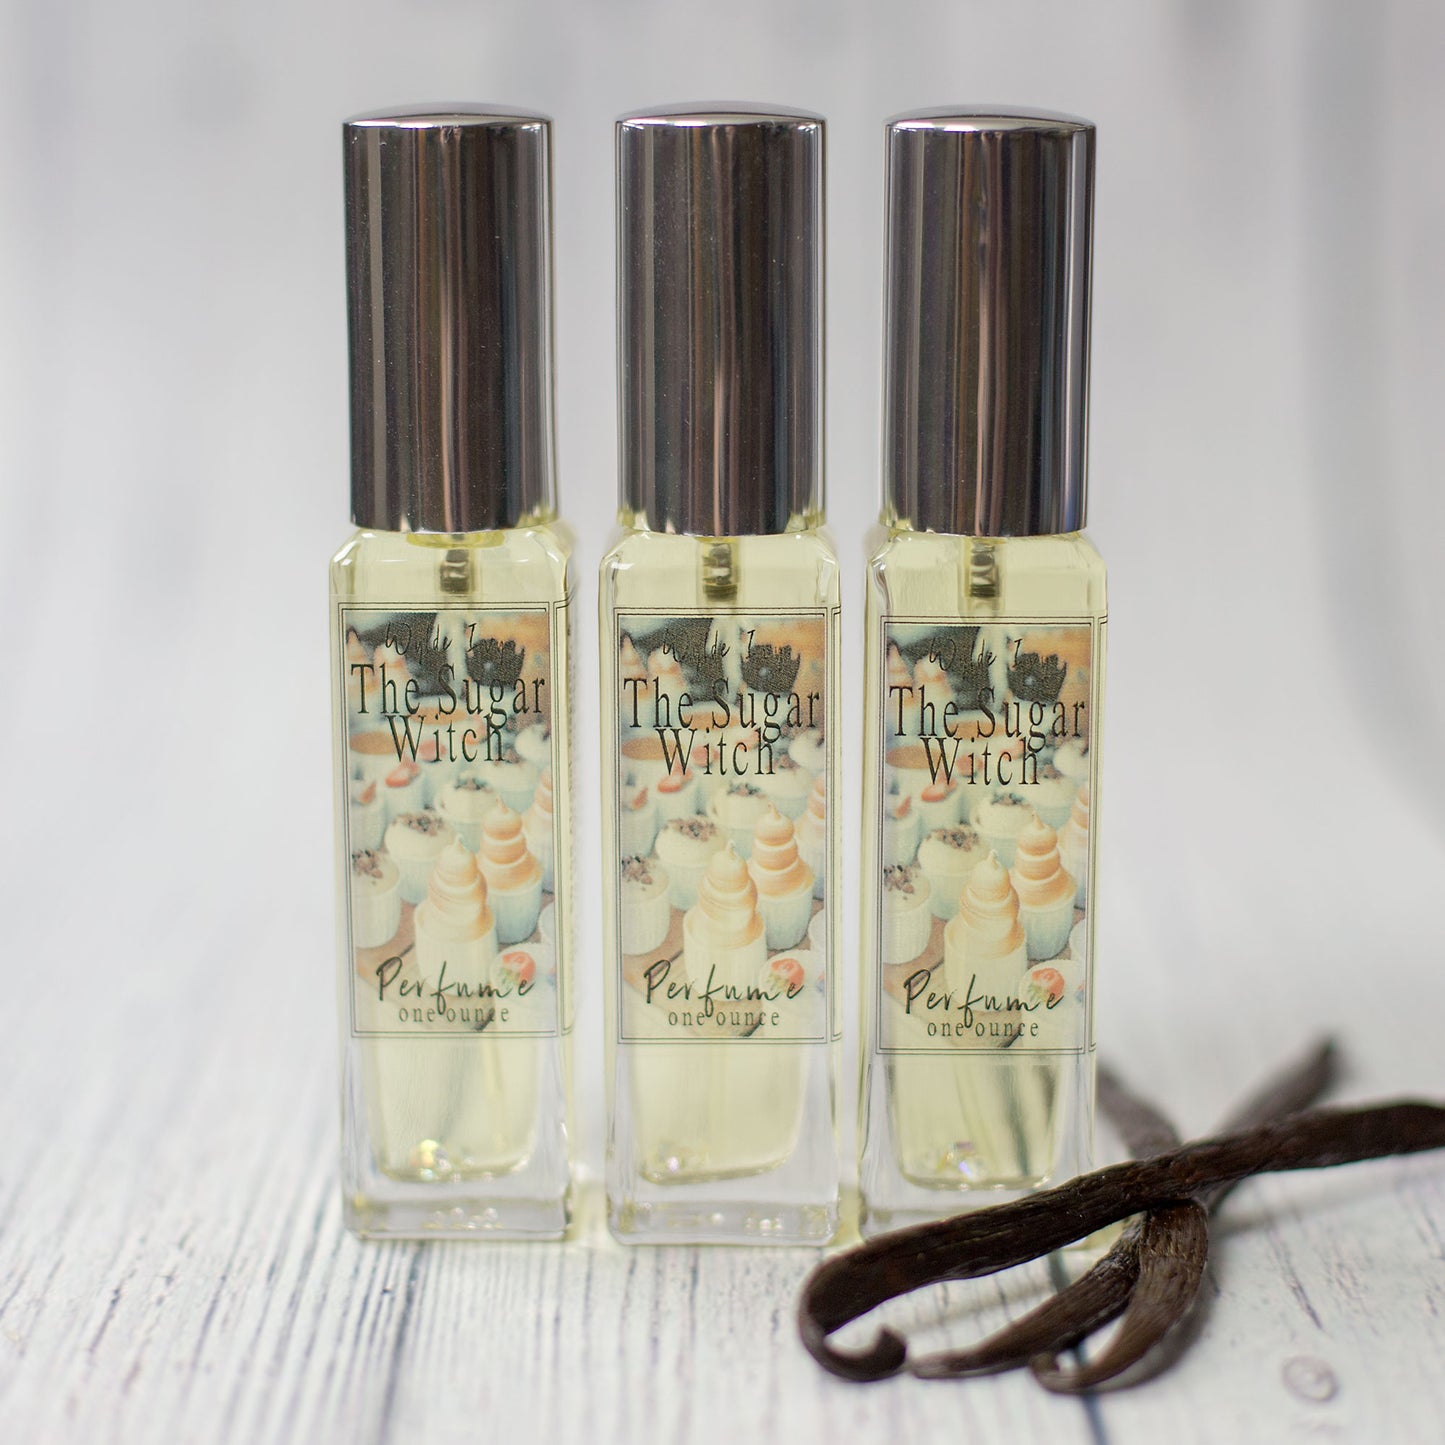 The Sugar Witch Perfume